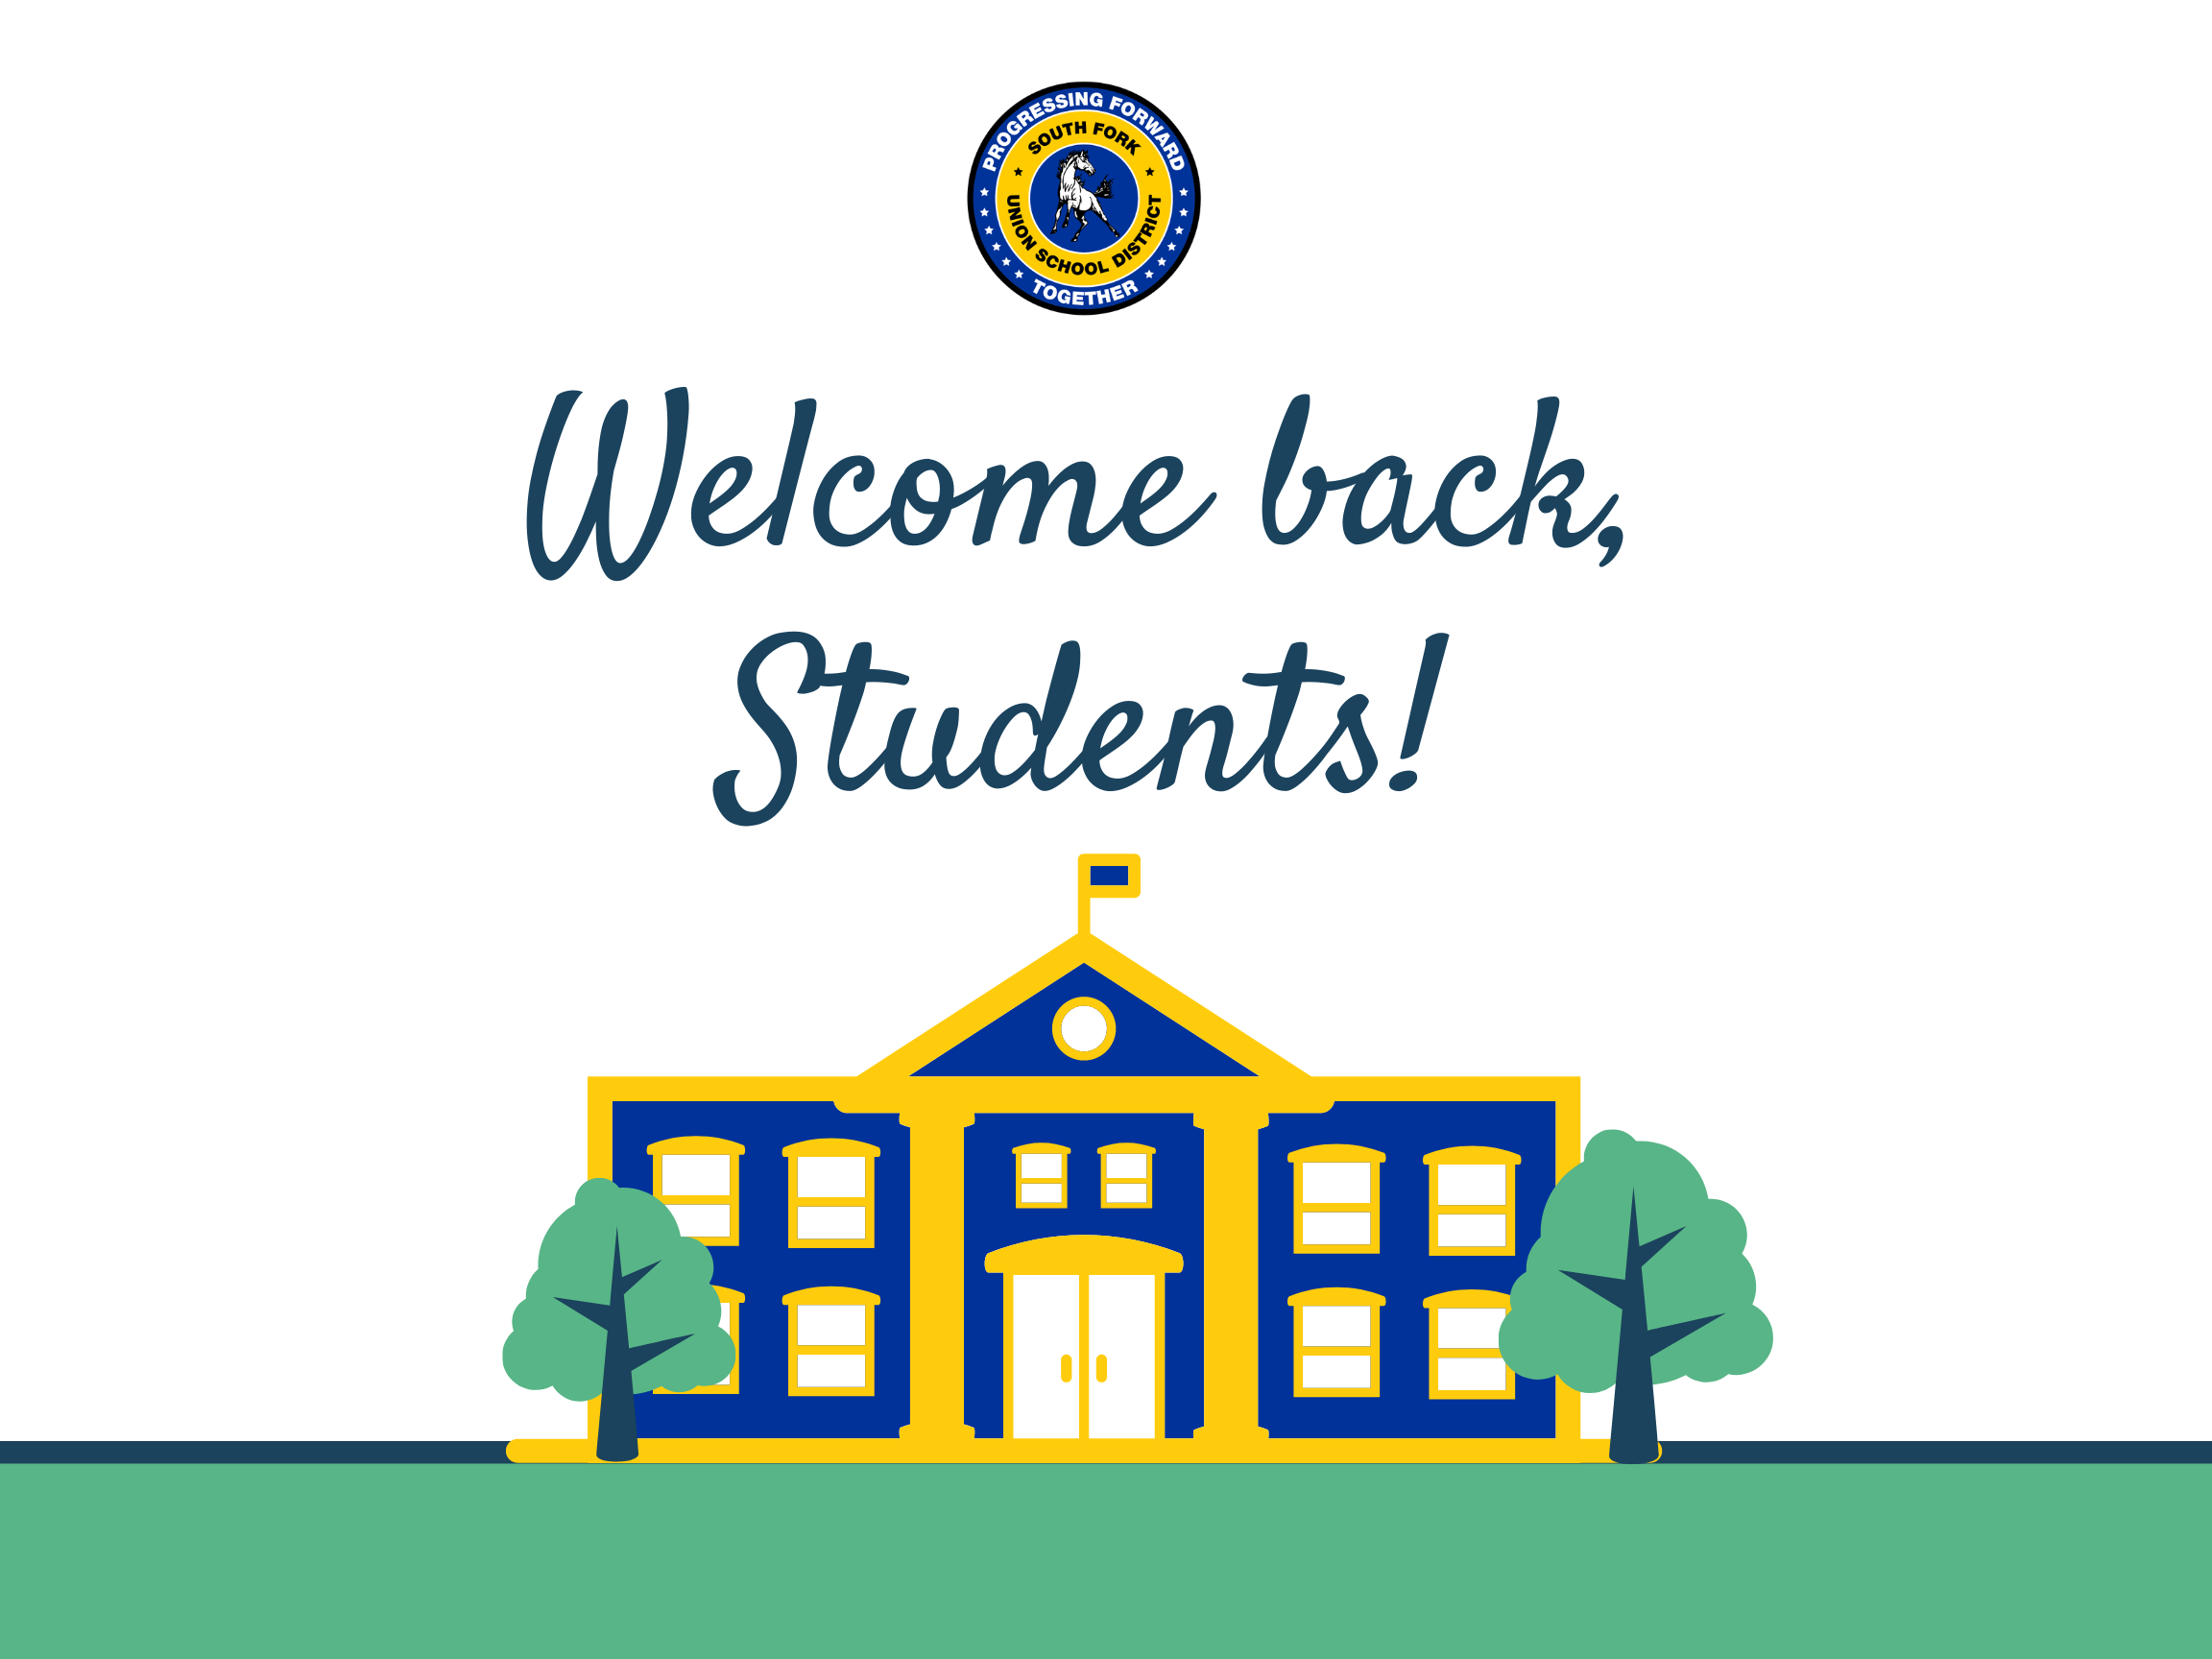 south fork welcome back students graphic with schoolhouse and greenery